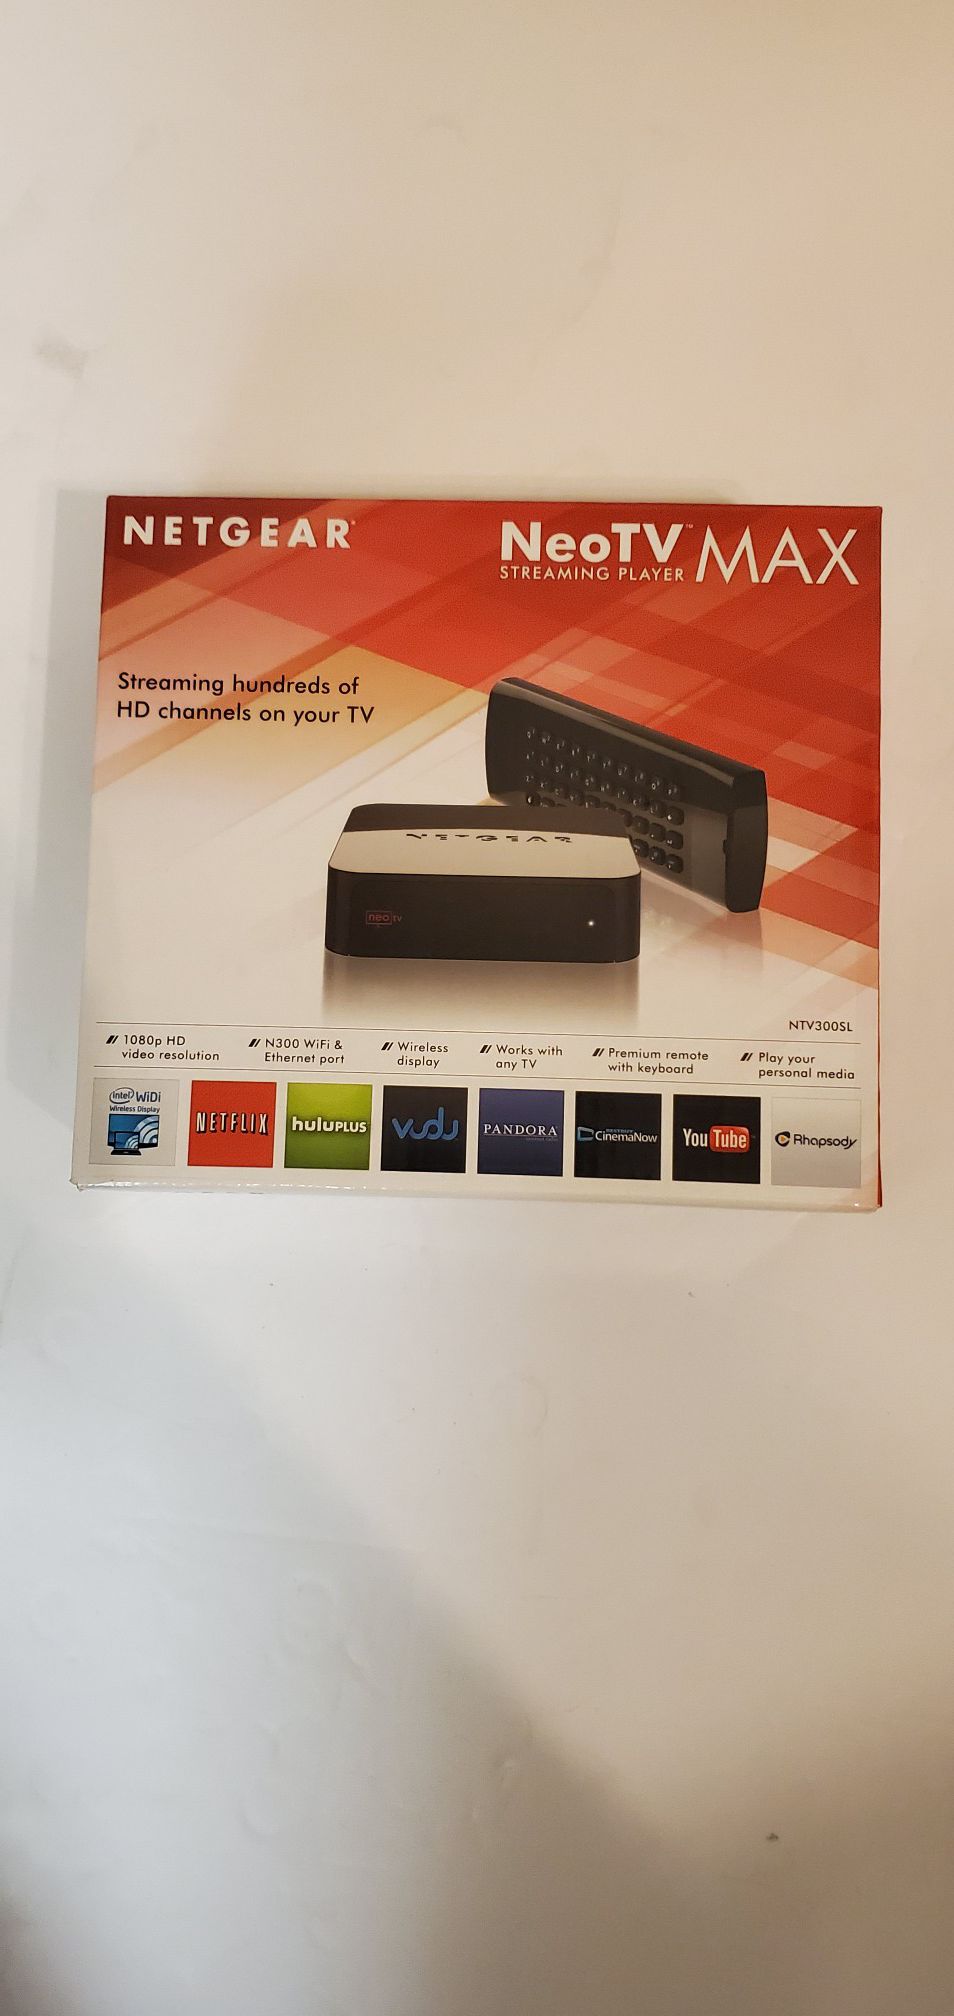 NeoTV MAX streaming player